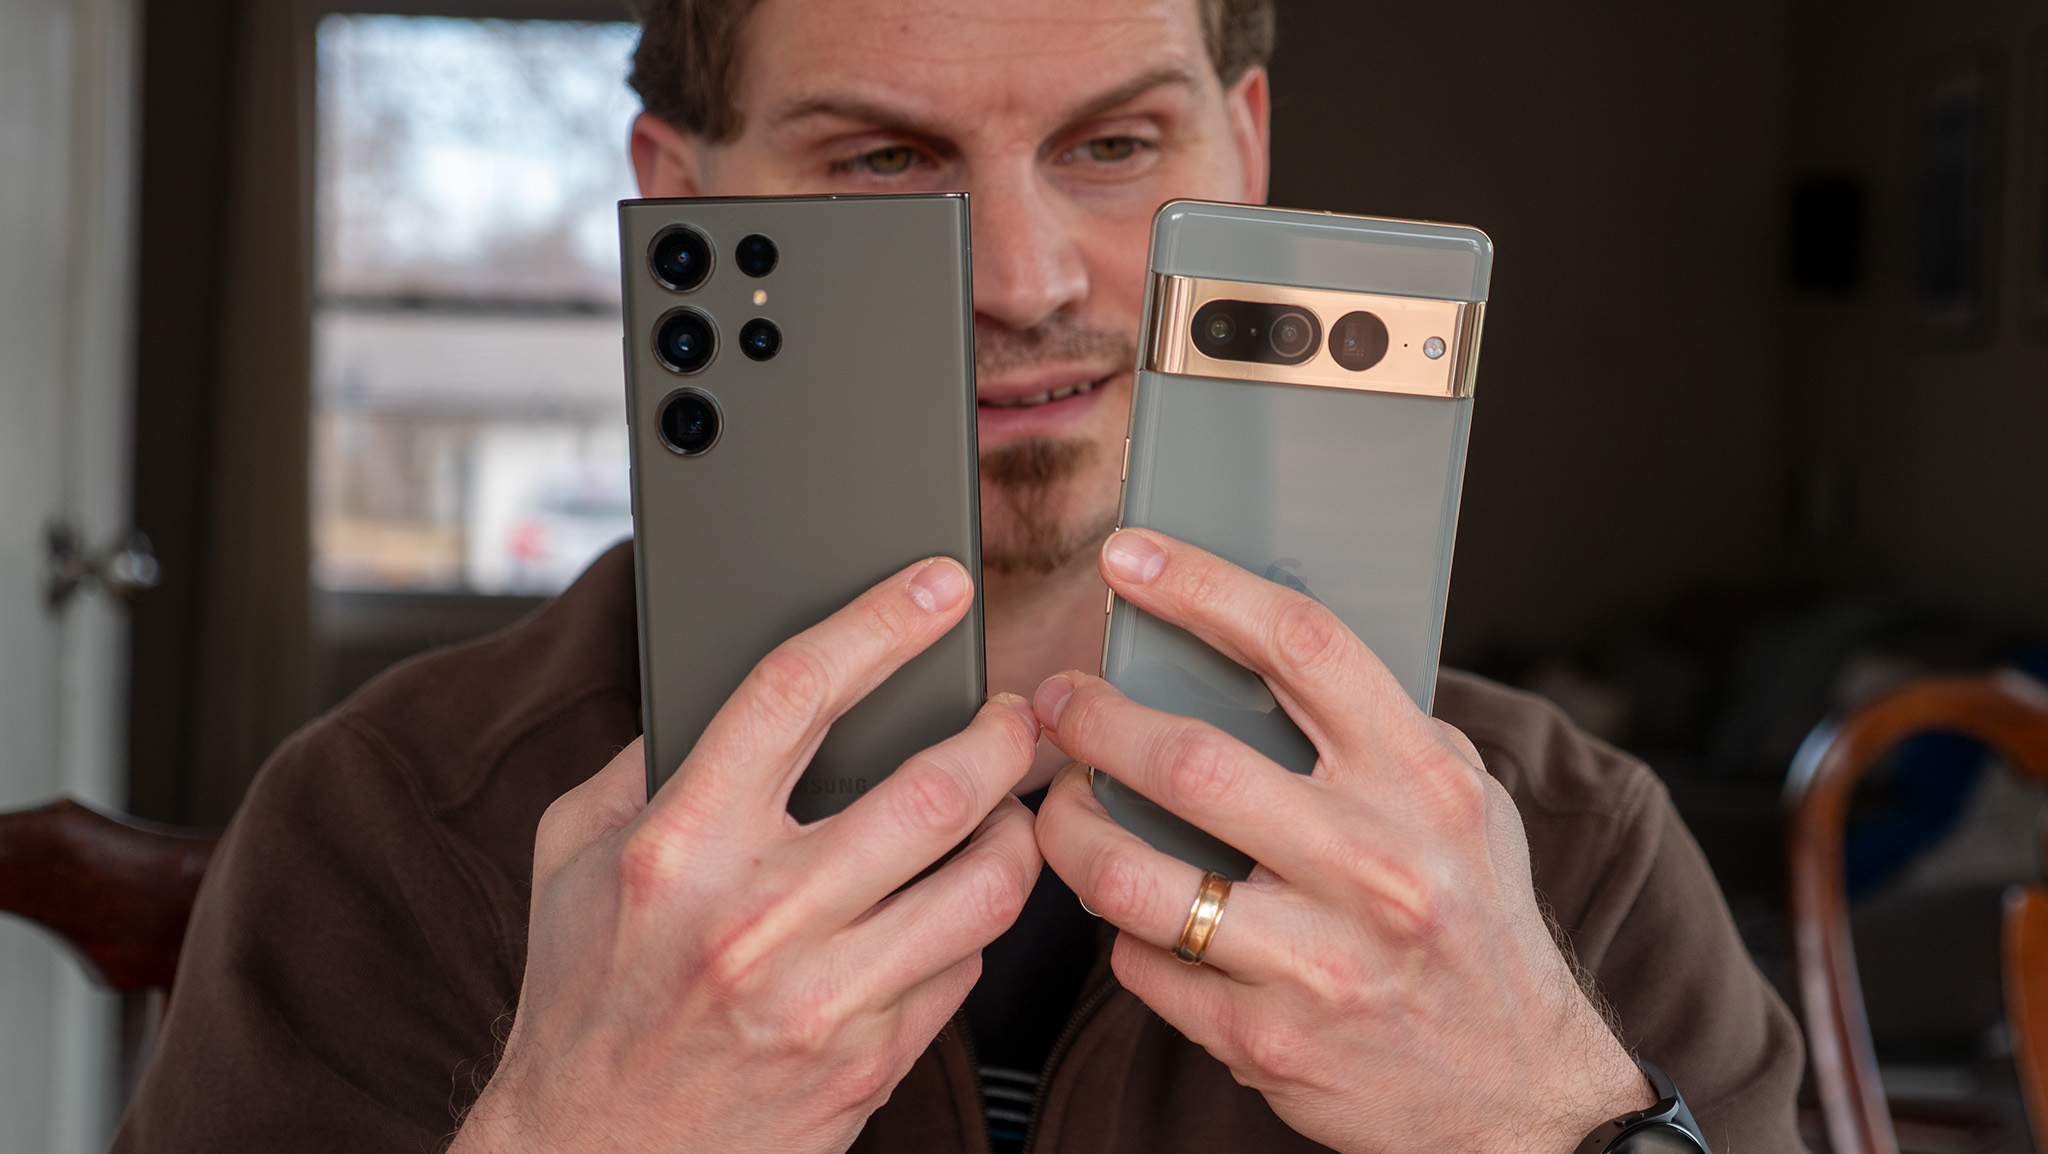 Top 7 Best Phones for Privacy Revealed